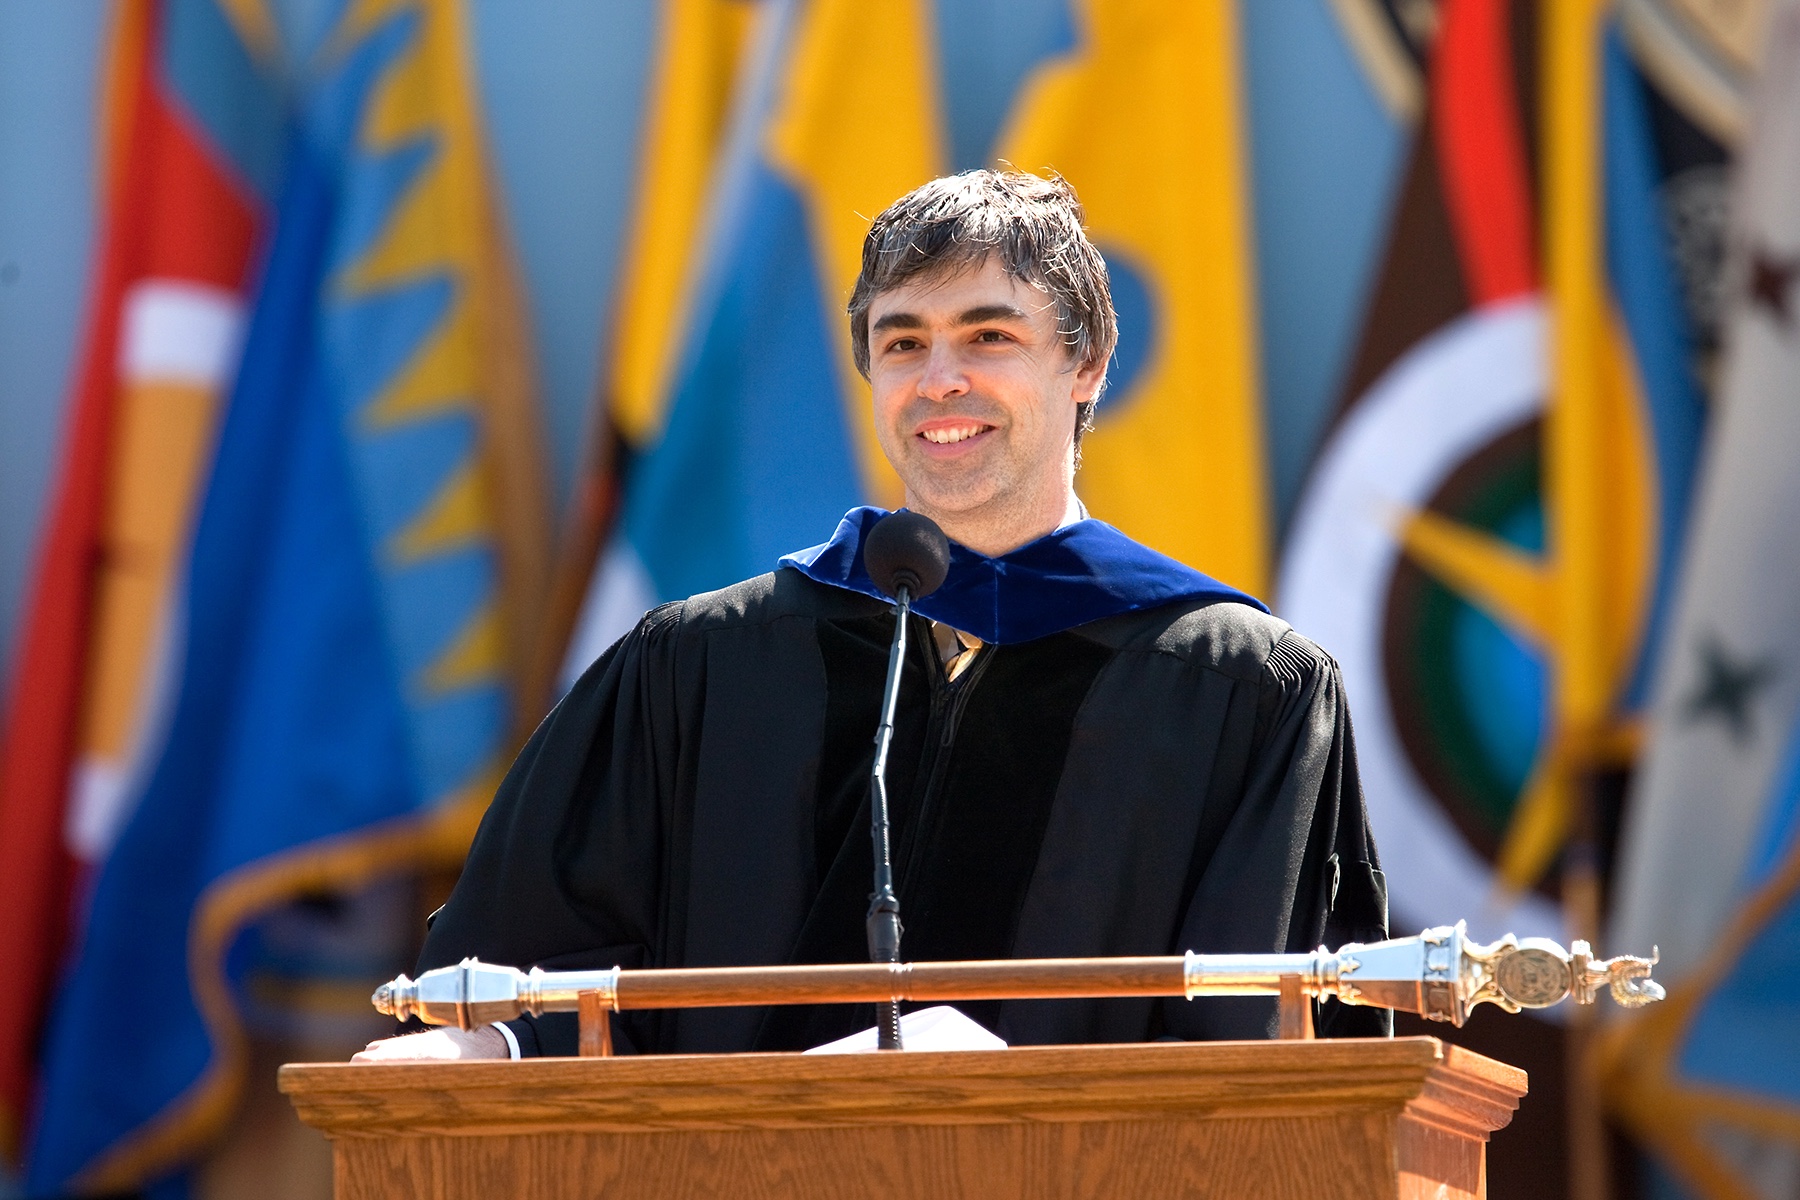 Larry Page delivers commencement address